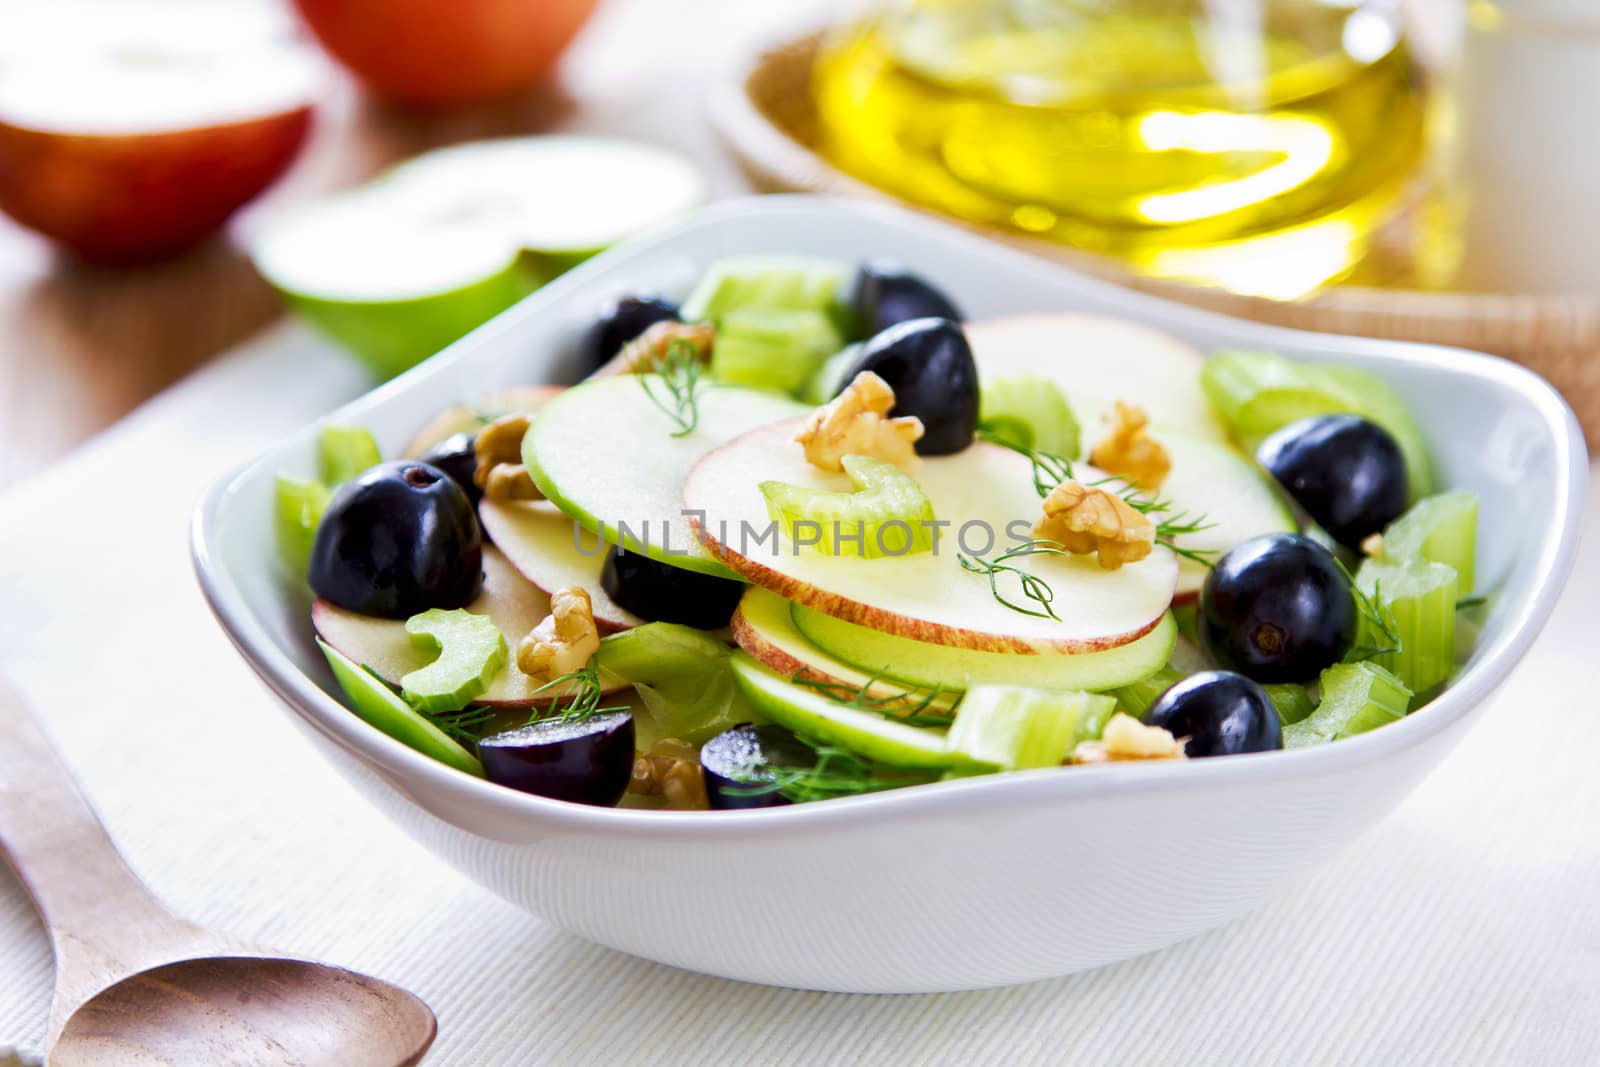 Apple with Celery, Grape and Walnut salad by vanillaechoes